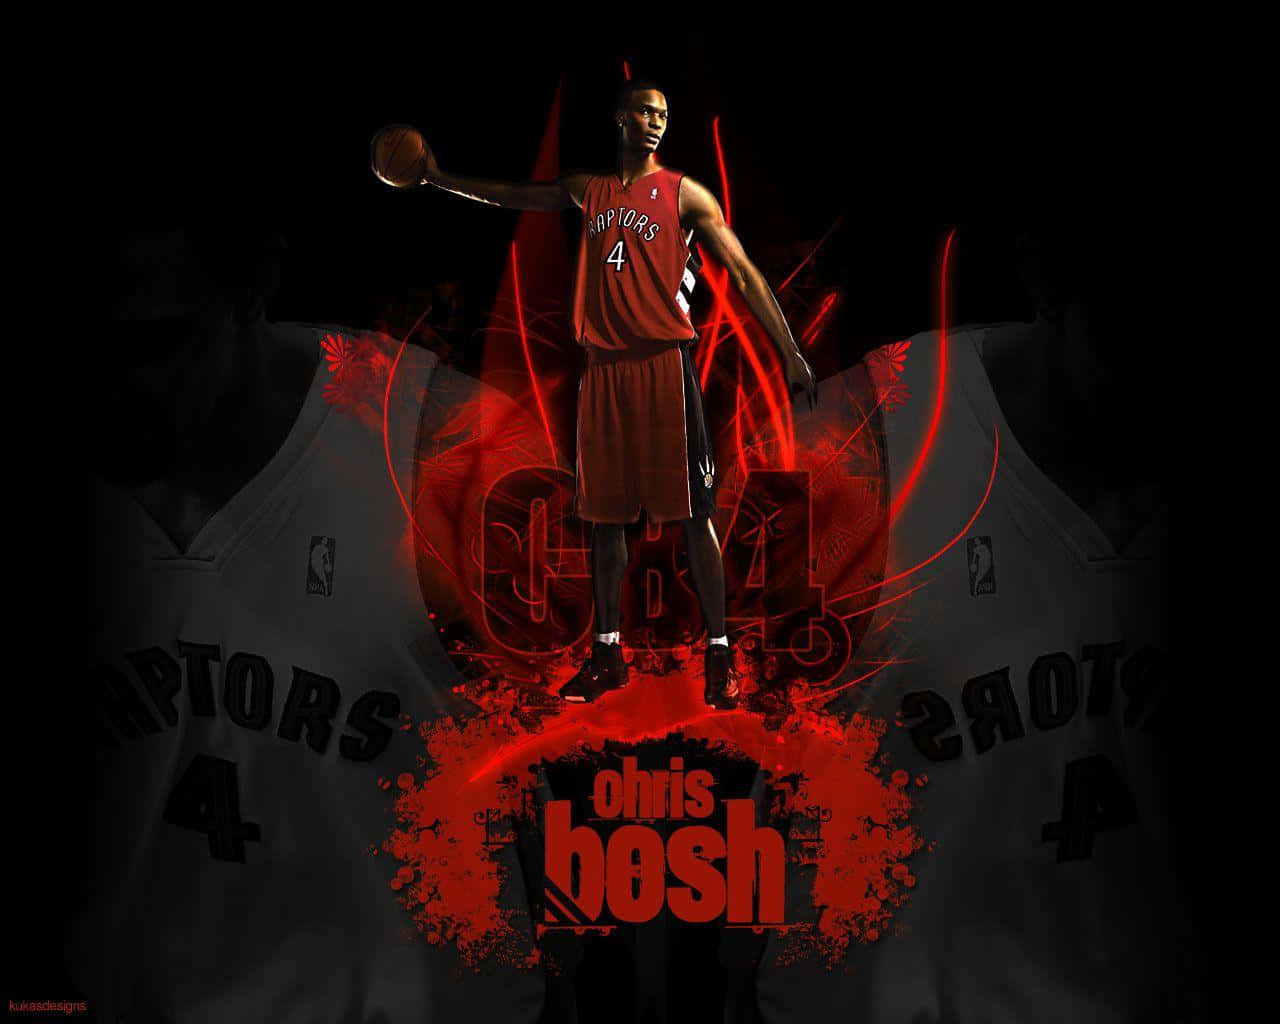 Chris Bosh Intensely Focused During A Game Wallpaper